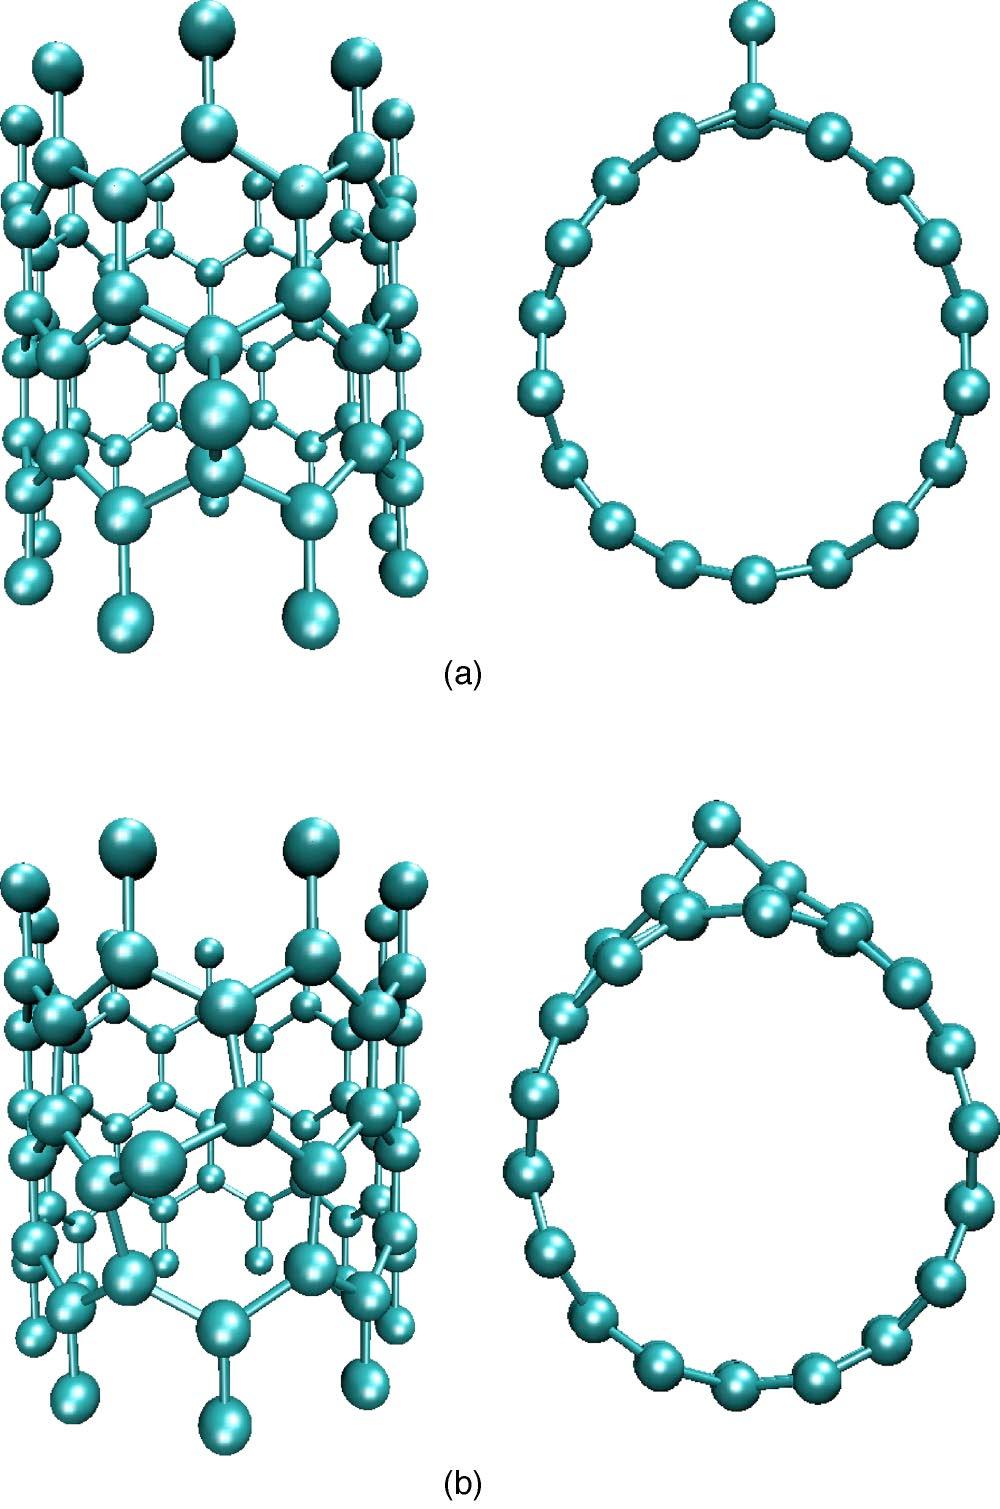 P. O. LEHTINEN et al. PHYSICAL REVIEW B 69, 155422 2004 TABLE I. Data for the various nanotubes considered in this study. The values for a graphene sheet are given as in Ref. 10.